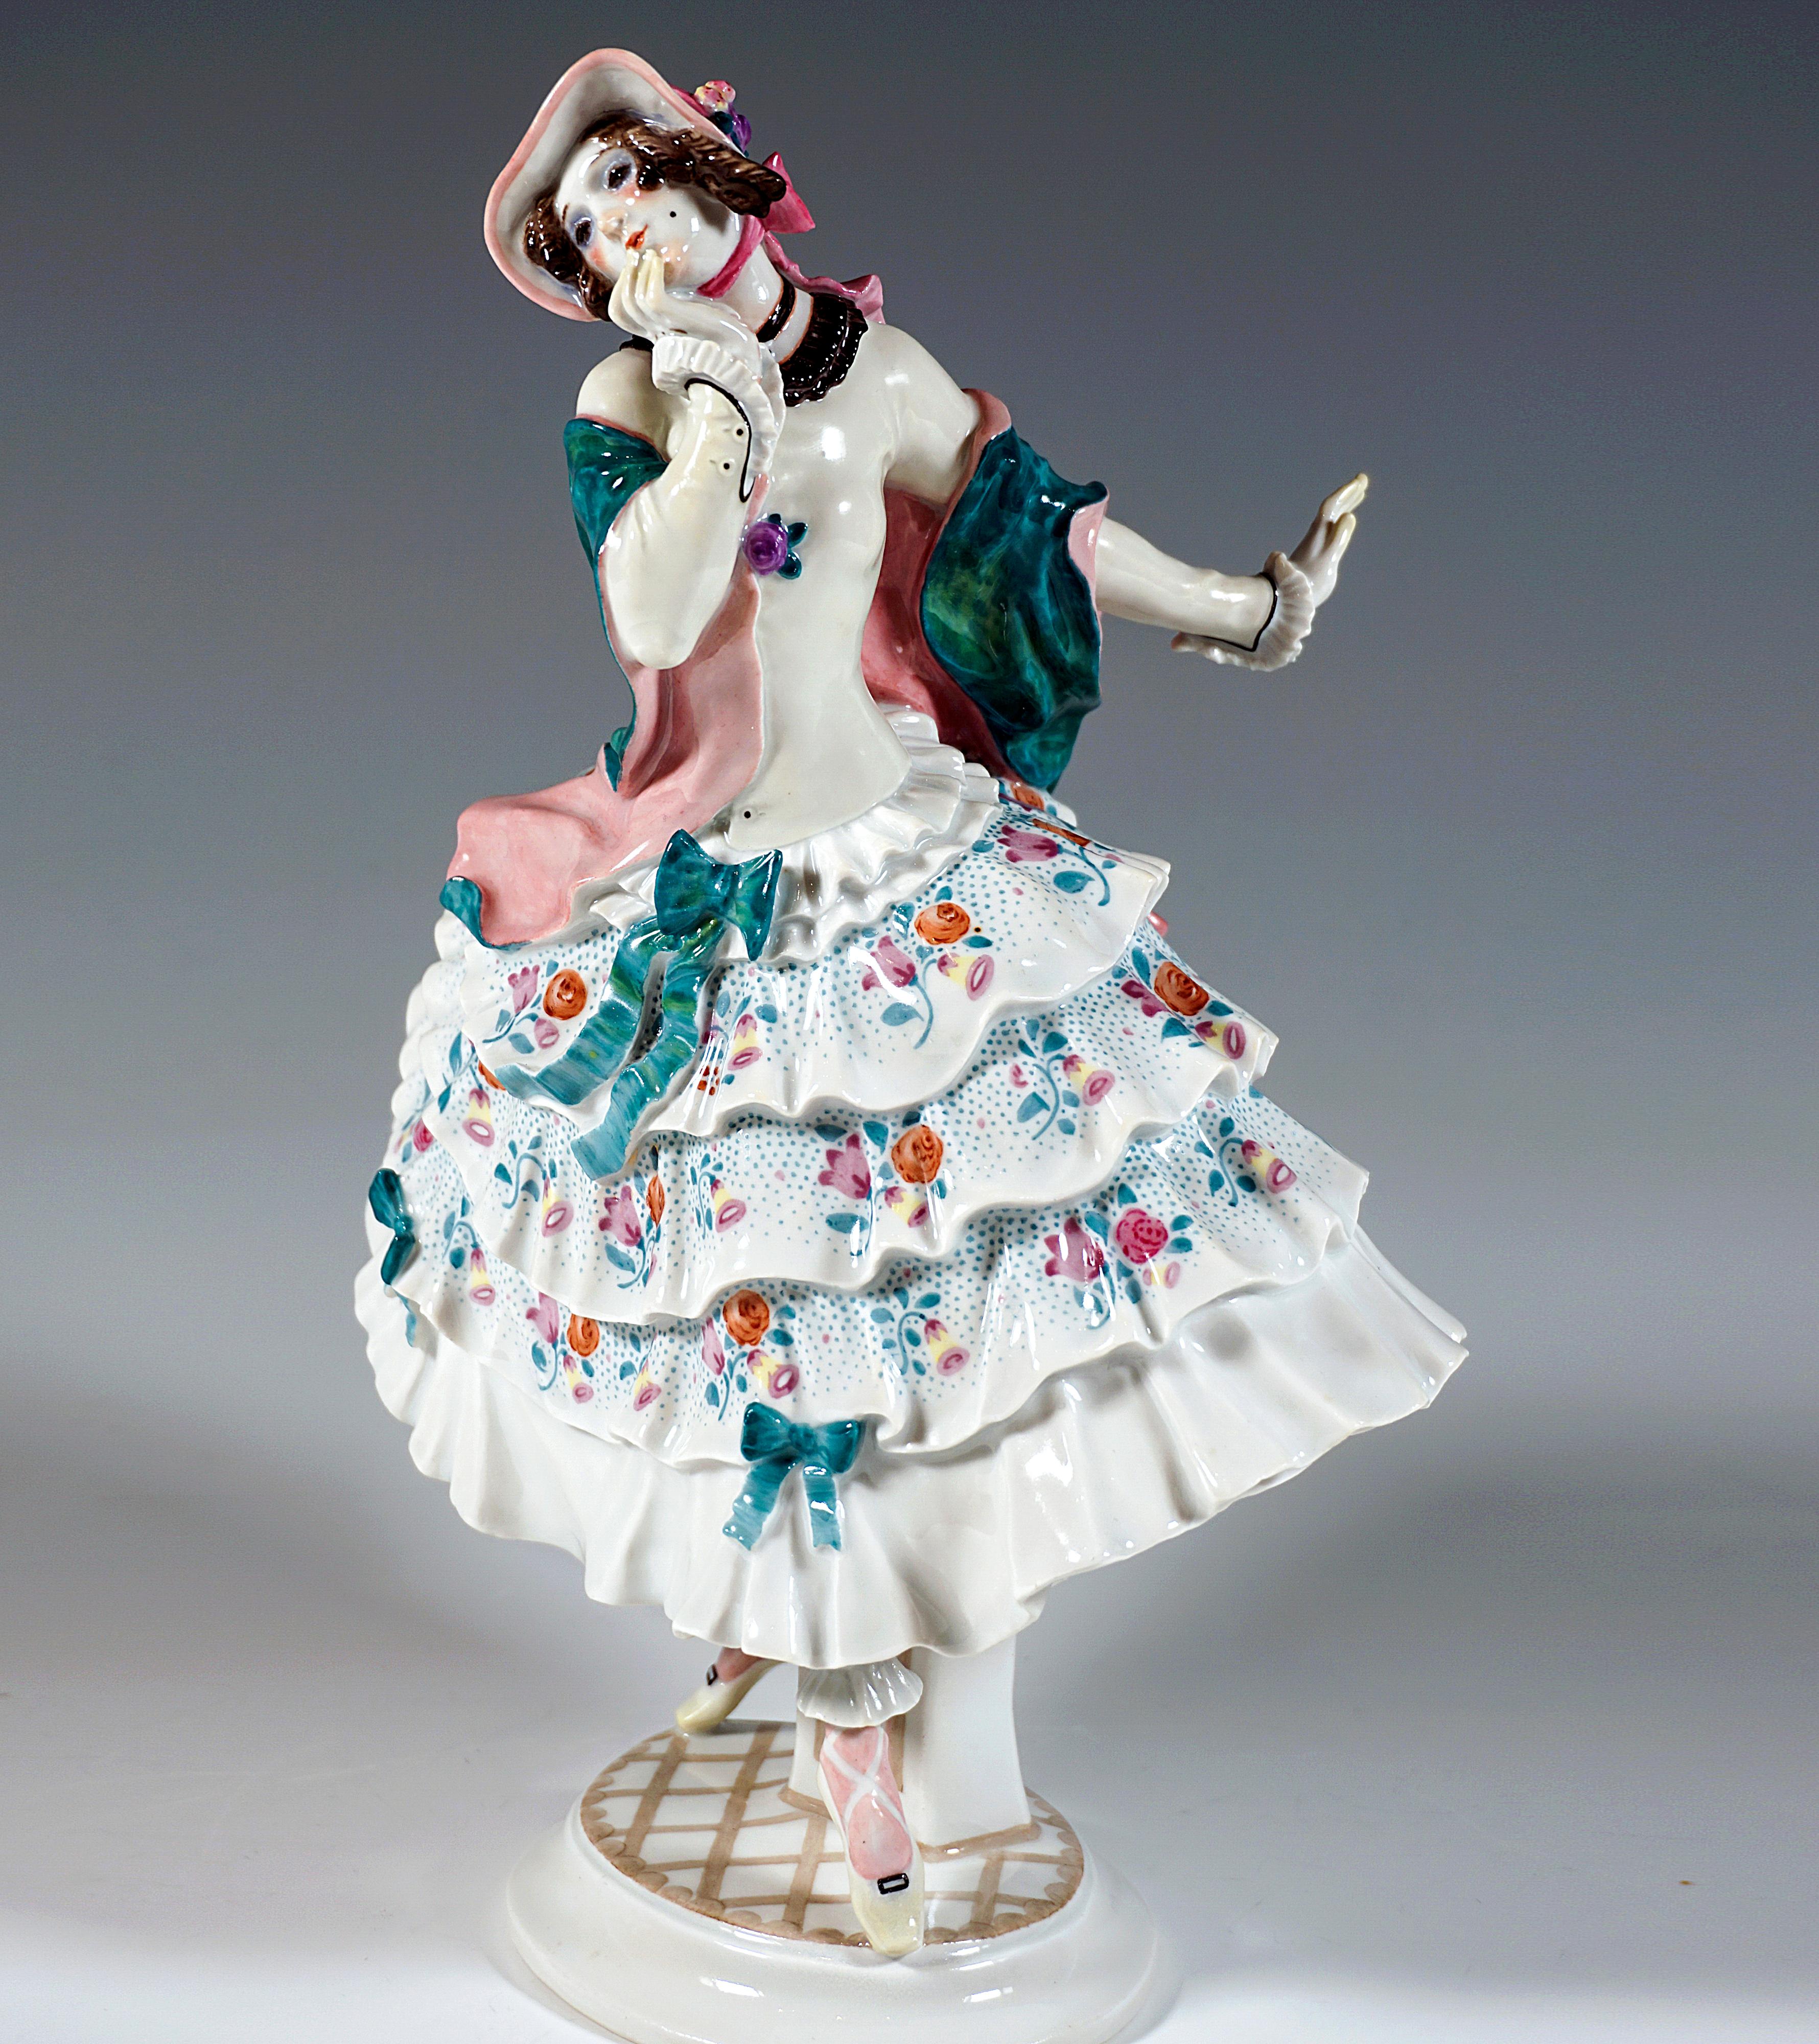 Finest Meissen Porcelain Figurine:
Dancer balancing on her toes, turning her head to the right and bringing her right hand indecisively to her chin, while with her left hand she 
performs a defensive gesture - feigning horror at the impetuous